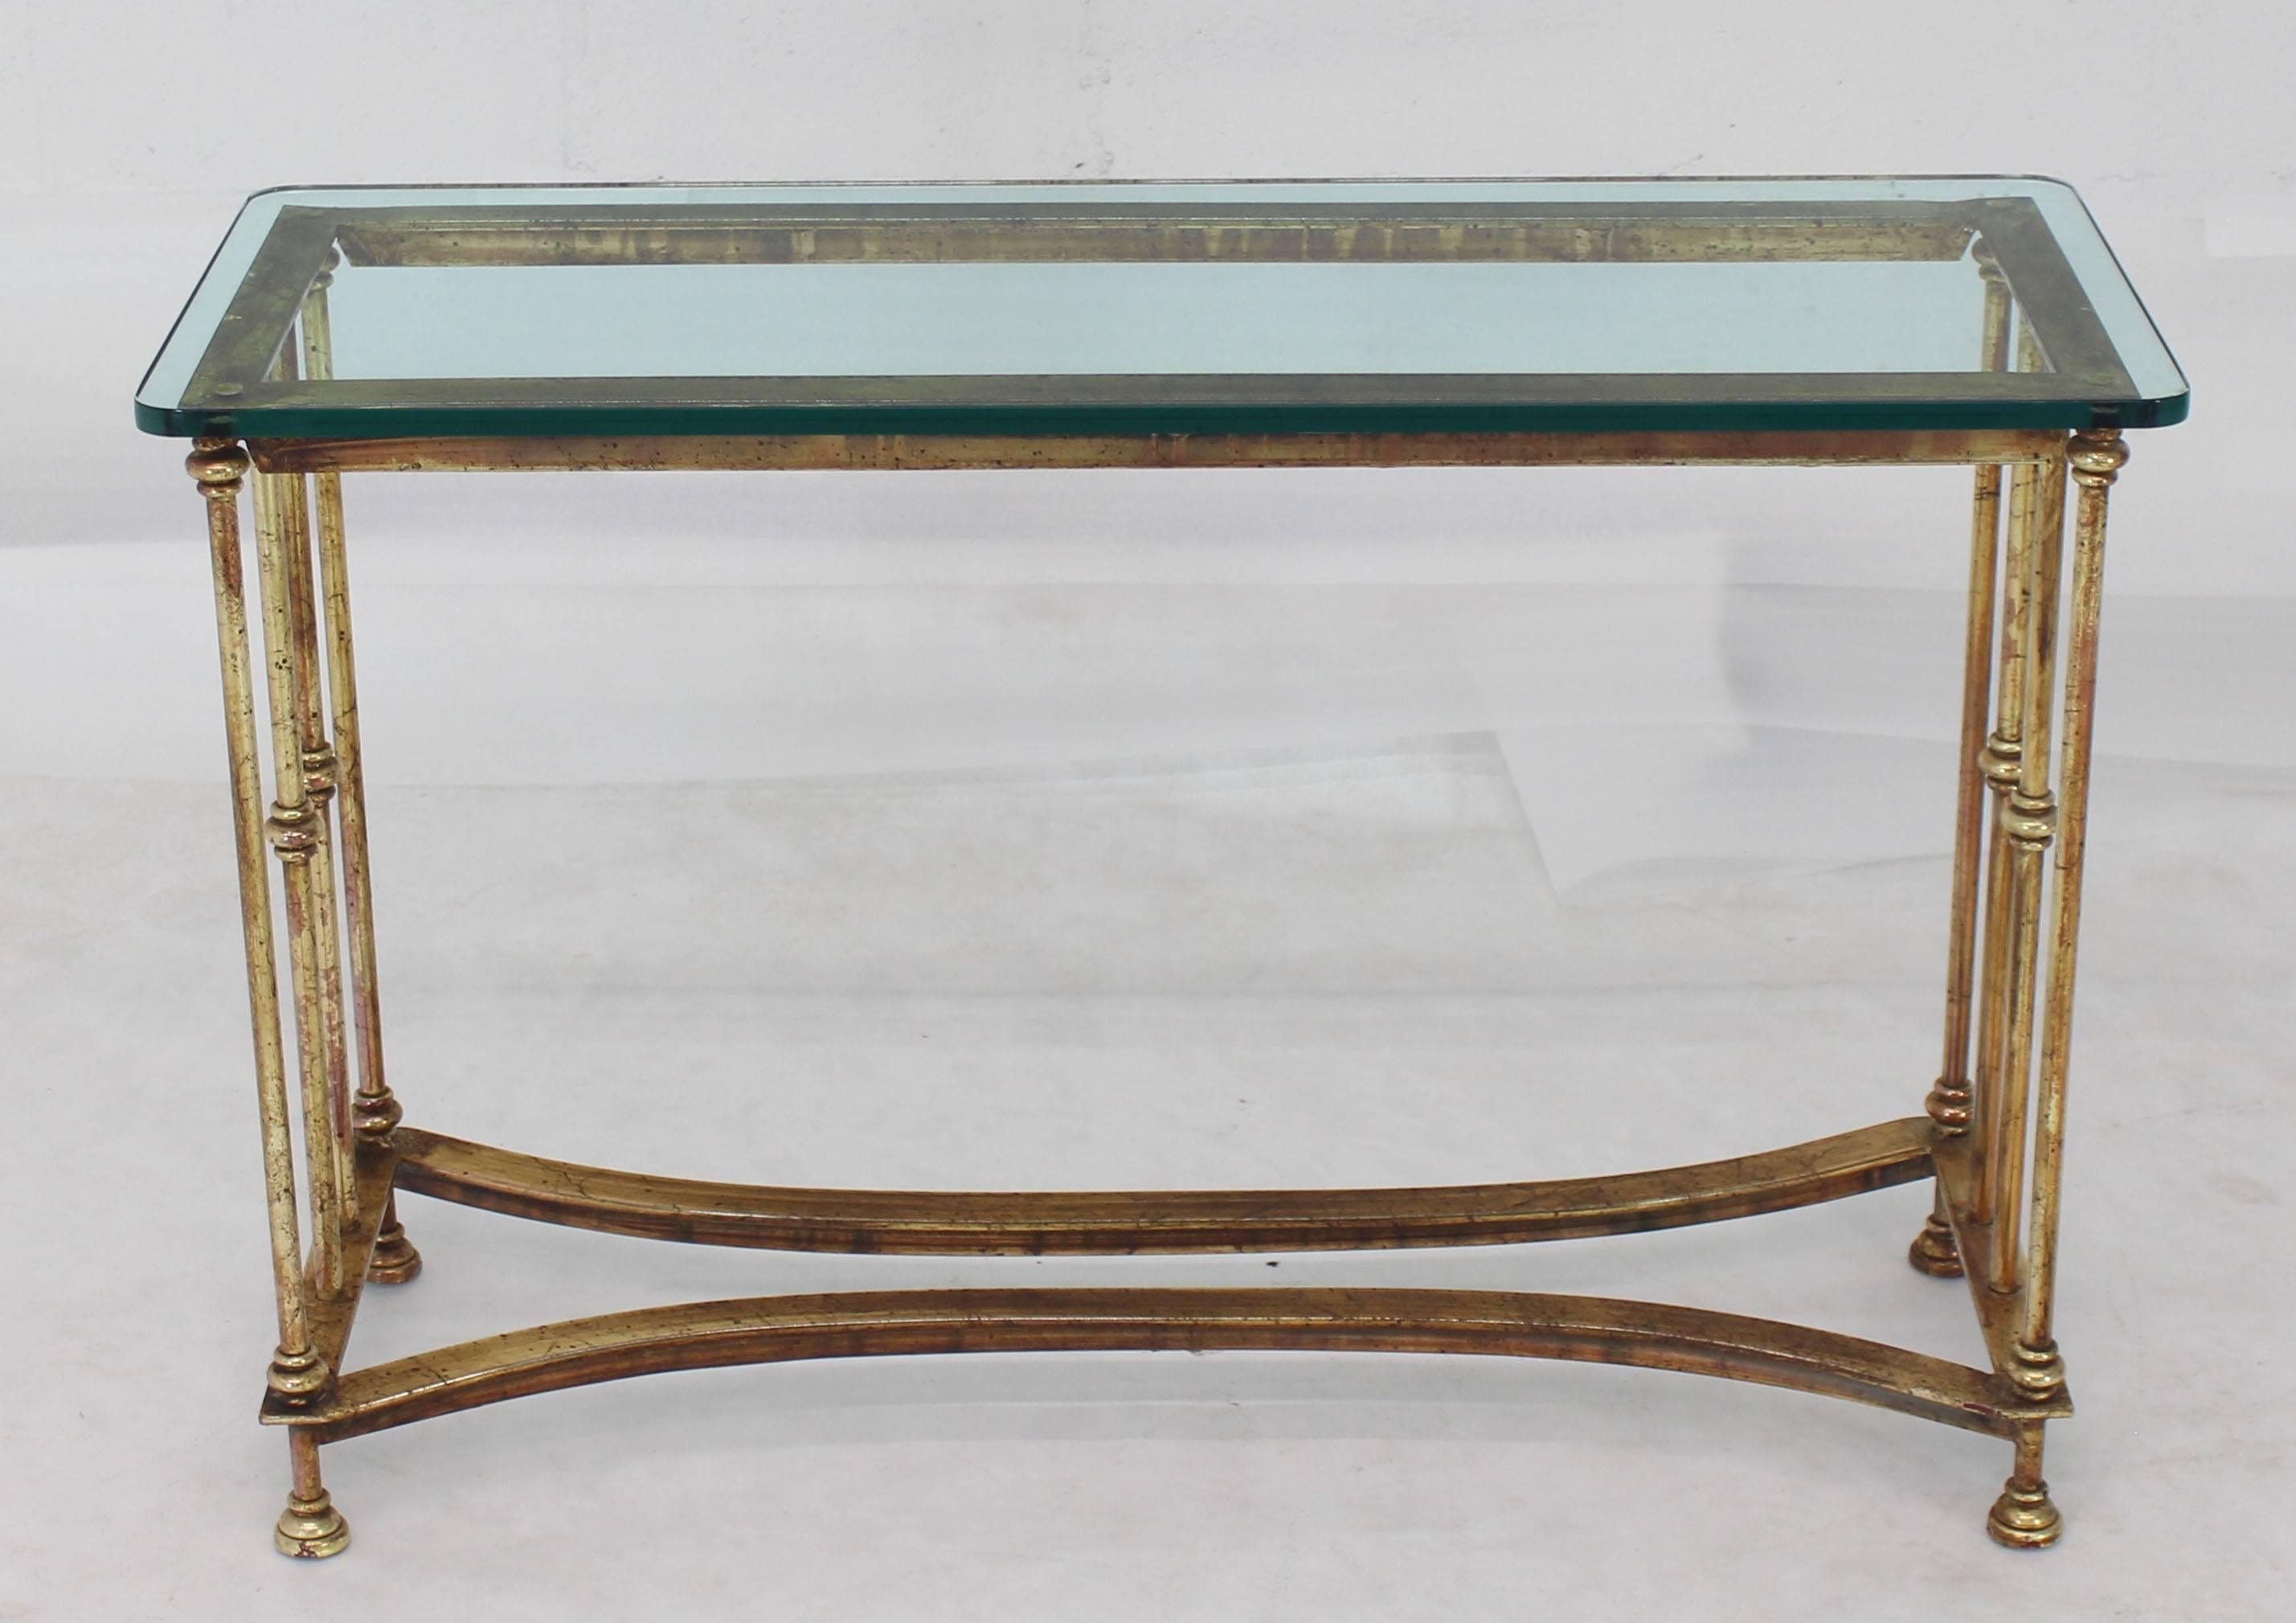 Gold gilt metal glass top console table.